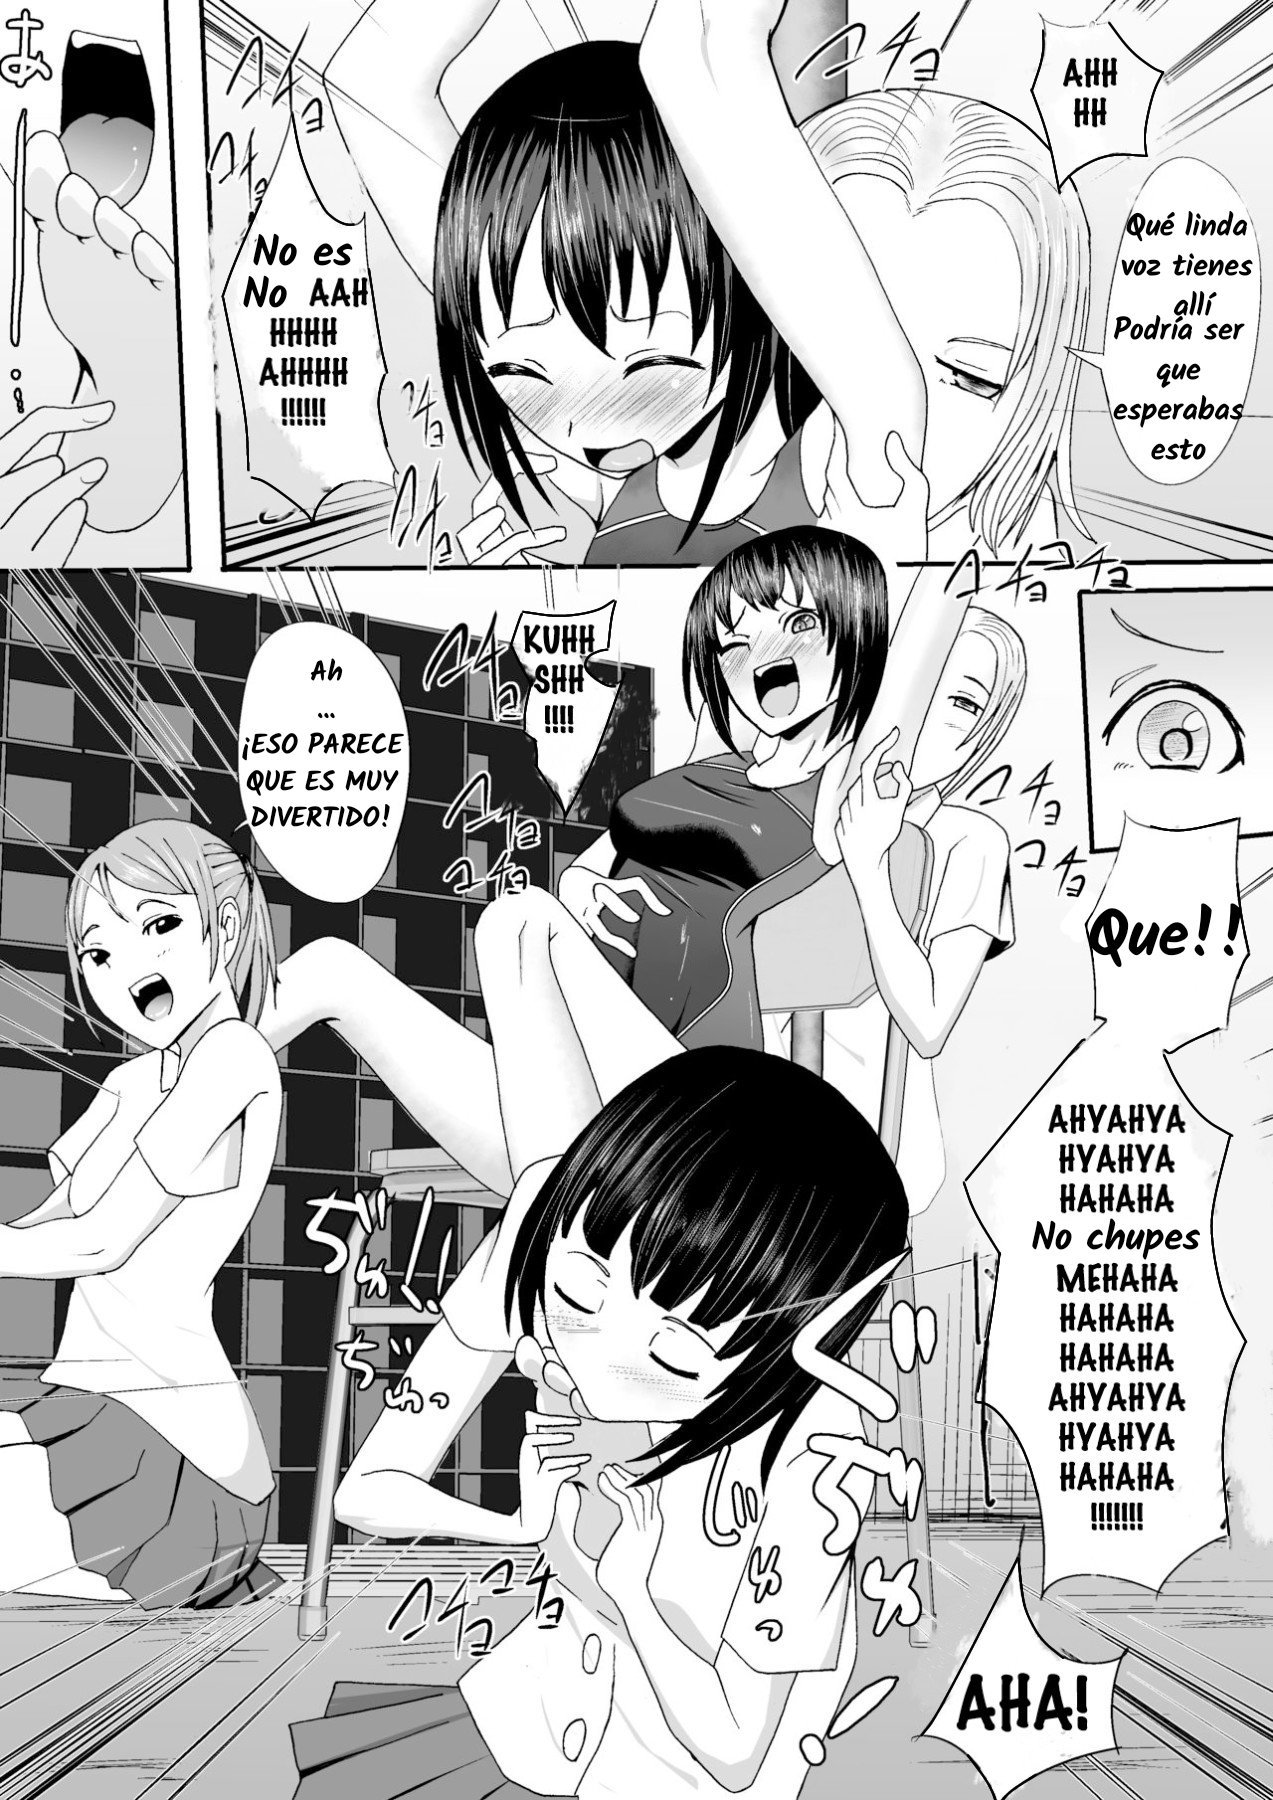 The Swimsuit Girls Ticklish Weapons - 20